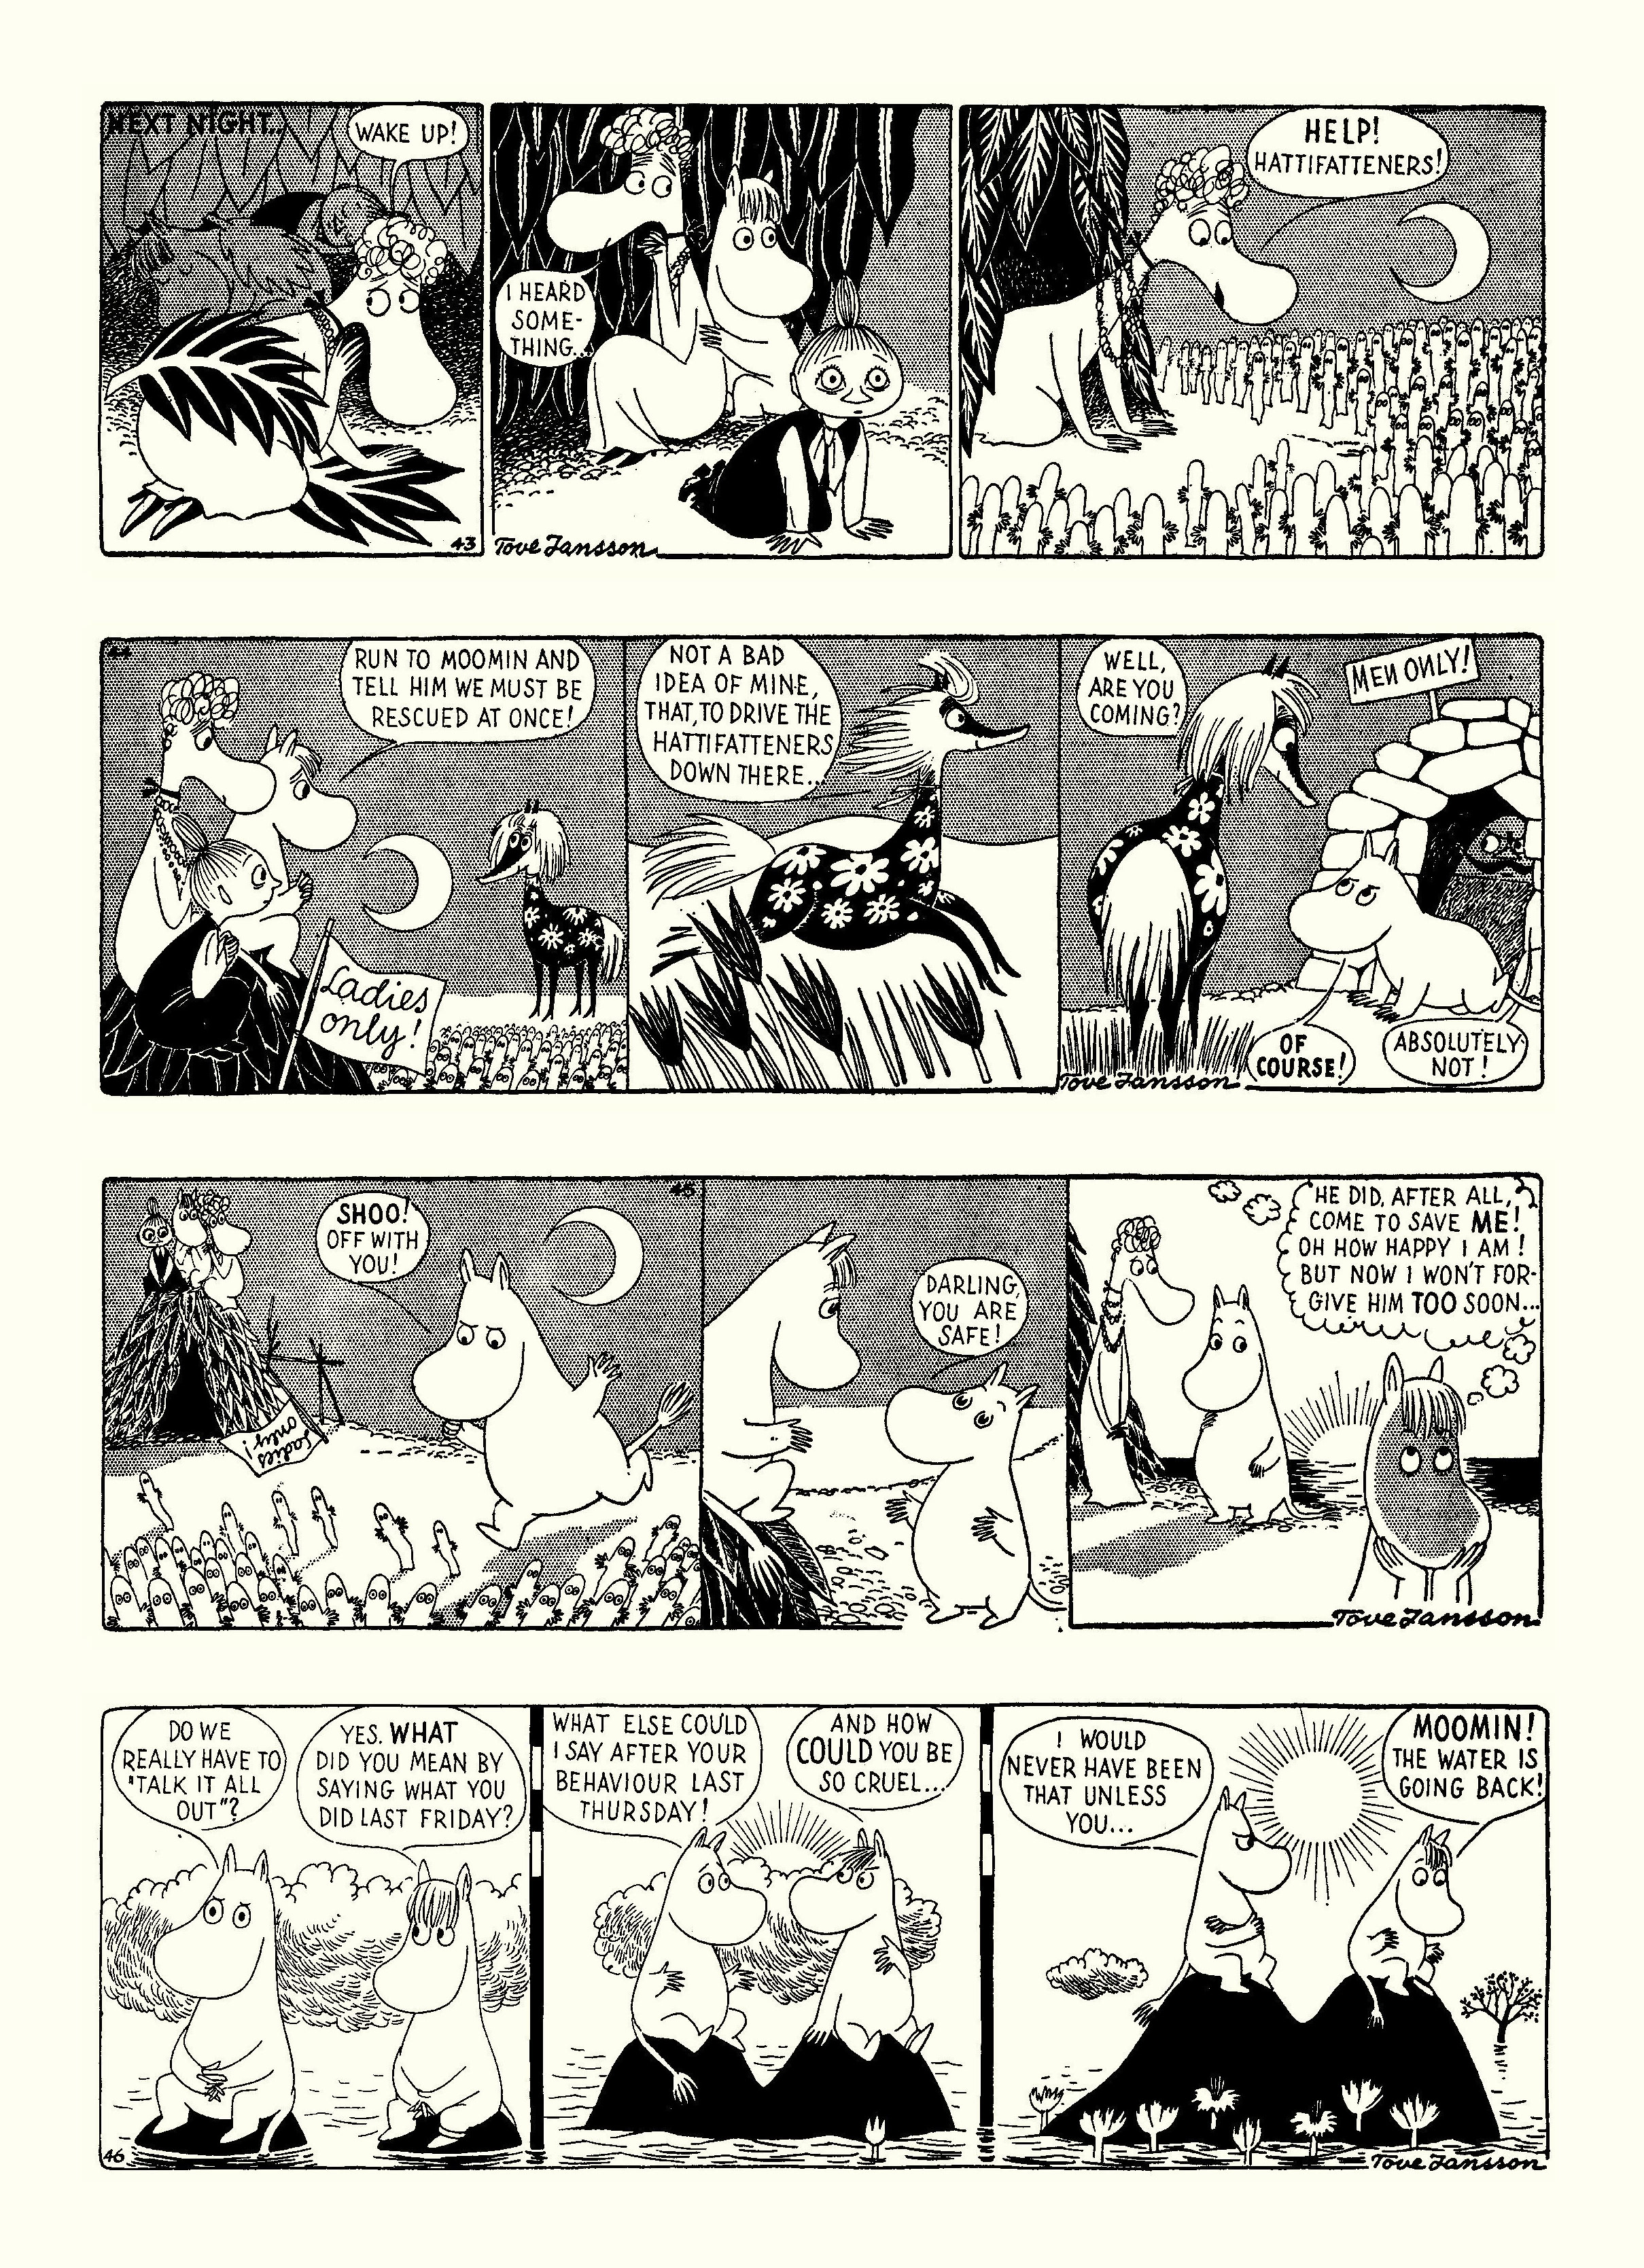 Read online Moomin: The Complete Tove Jansson Comic Strip comic -  Issue # TPB 3 - 17